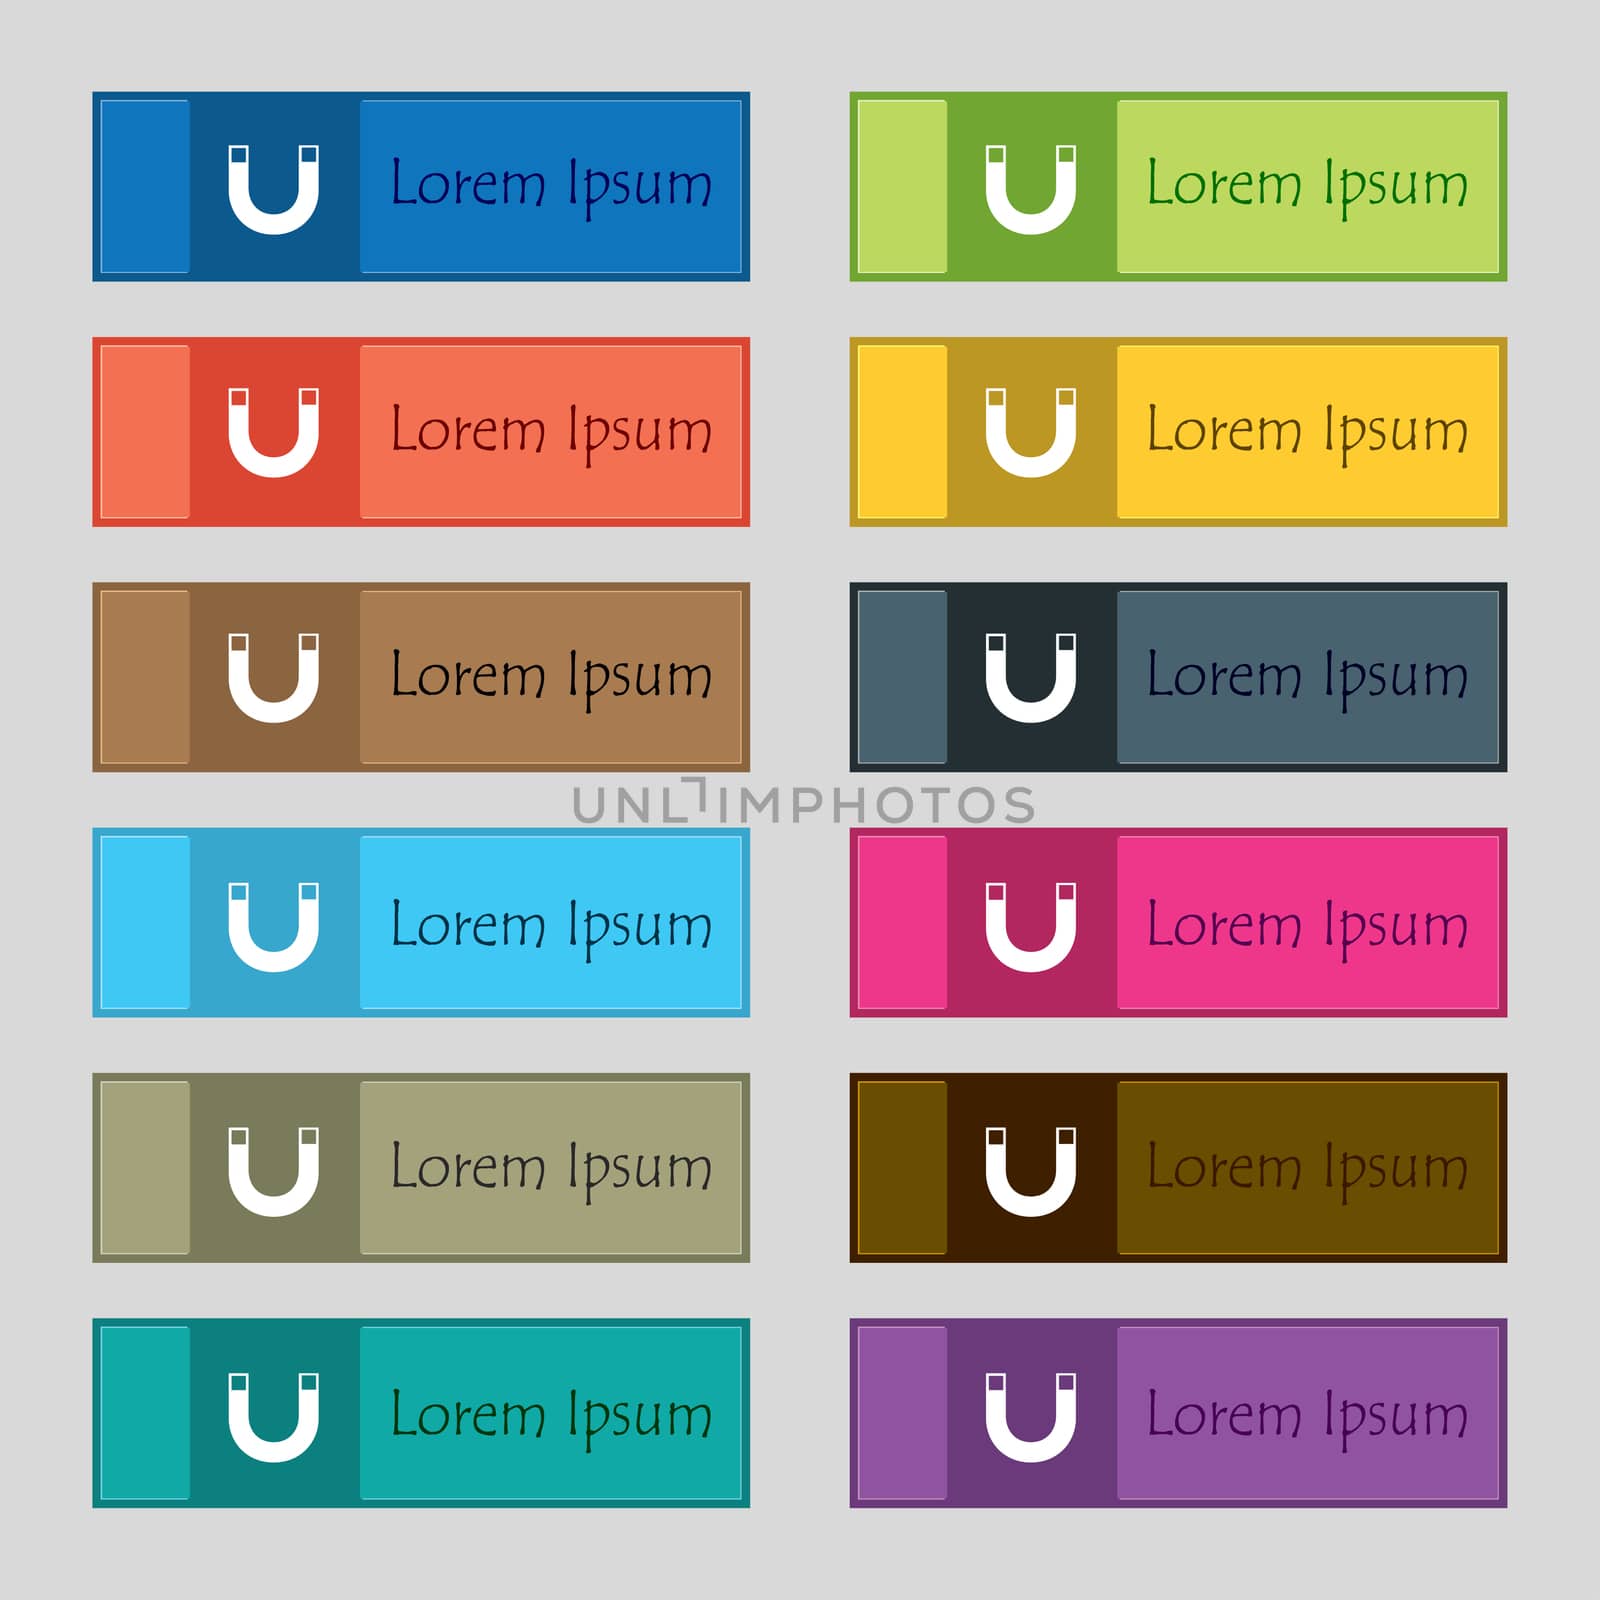 magnet sign icon. horseshoe it symbol. Repair sign. Set of colored buttons  by serhii_lohvyniuk